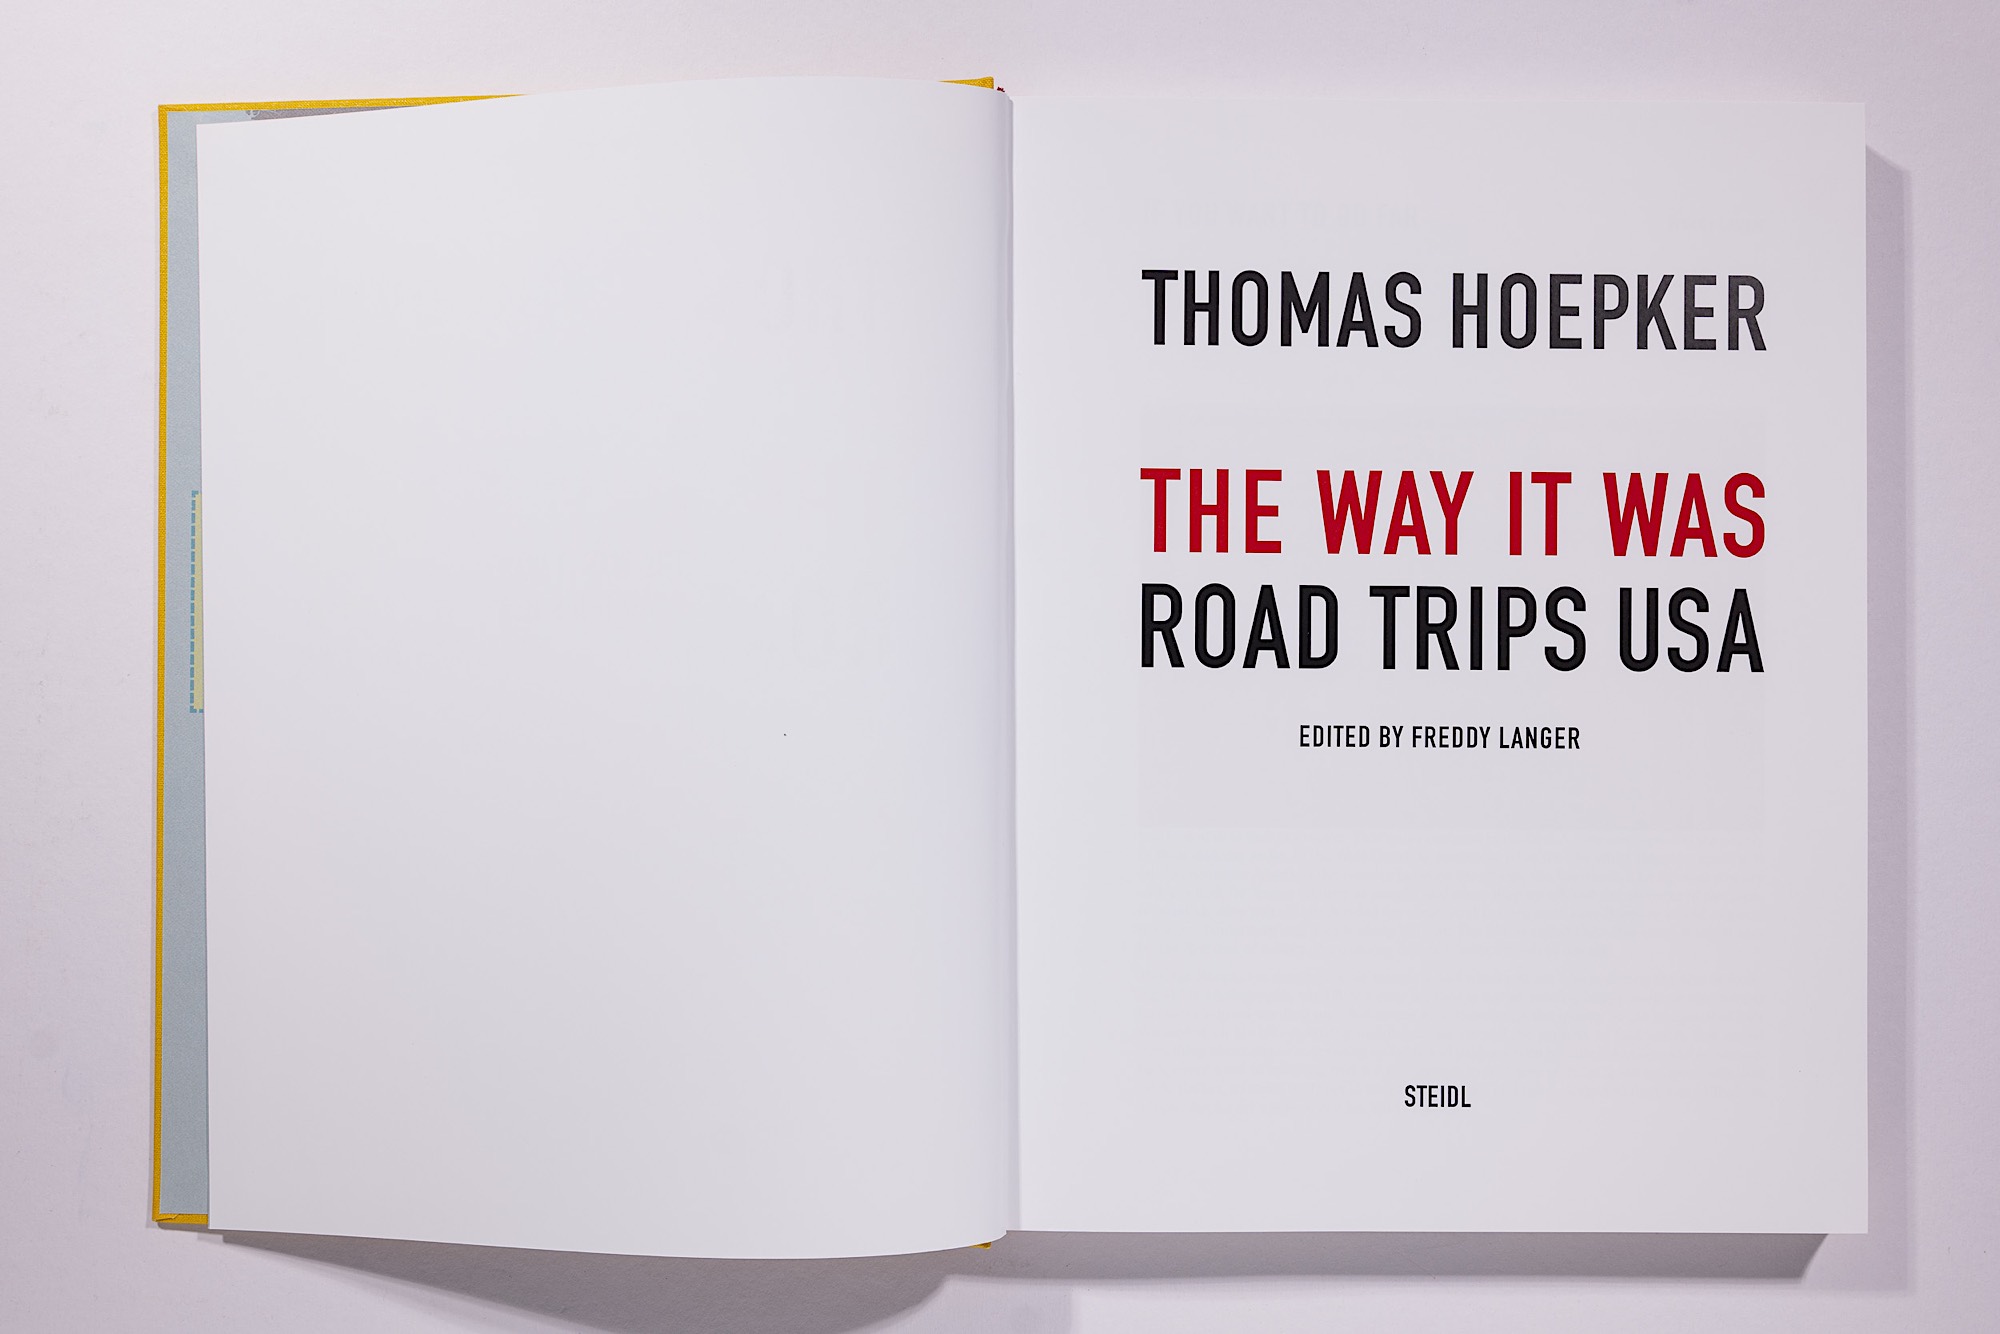 Thomas Hoepker - The Way It Was: Road Trips USA Image 4